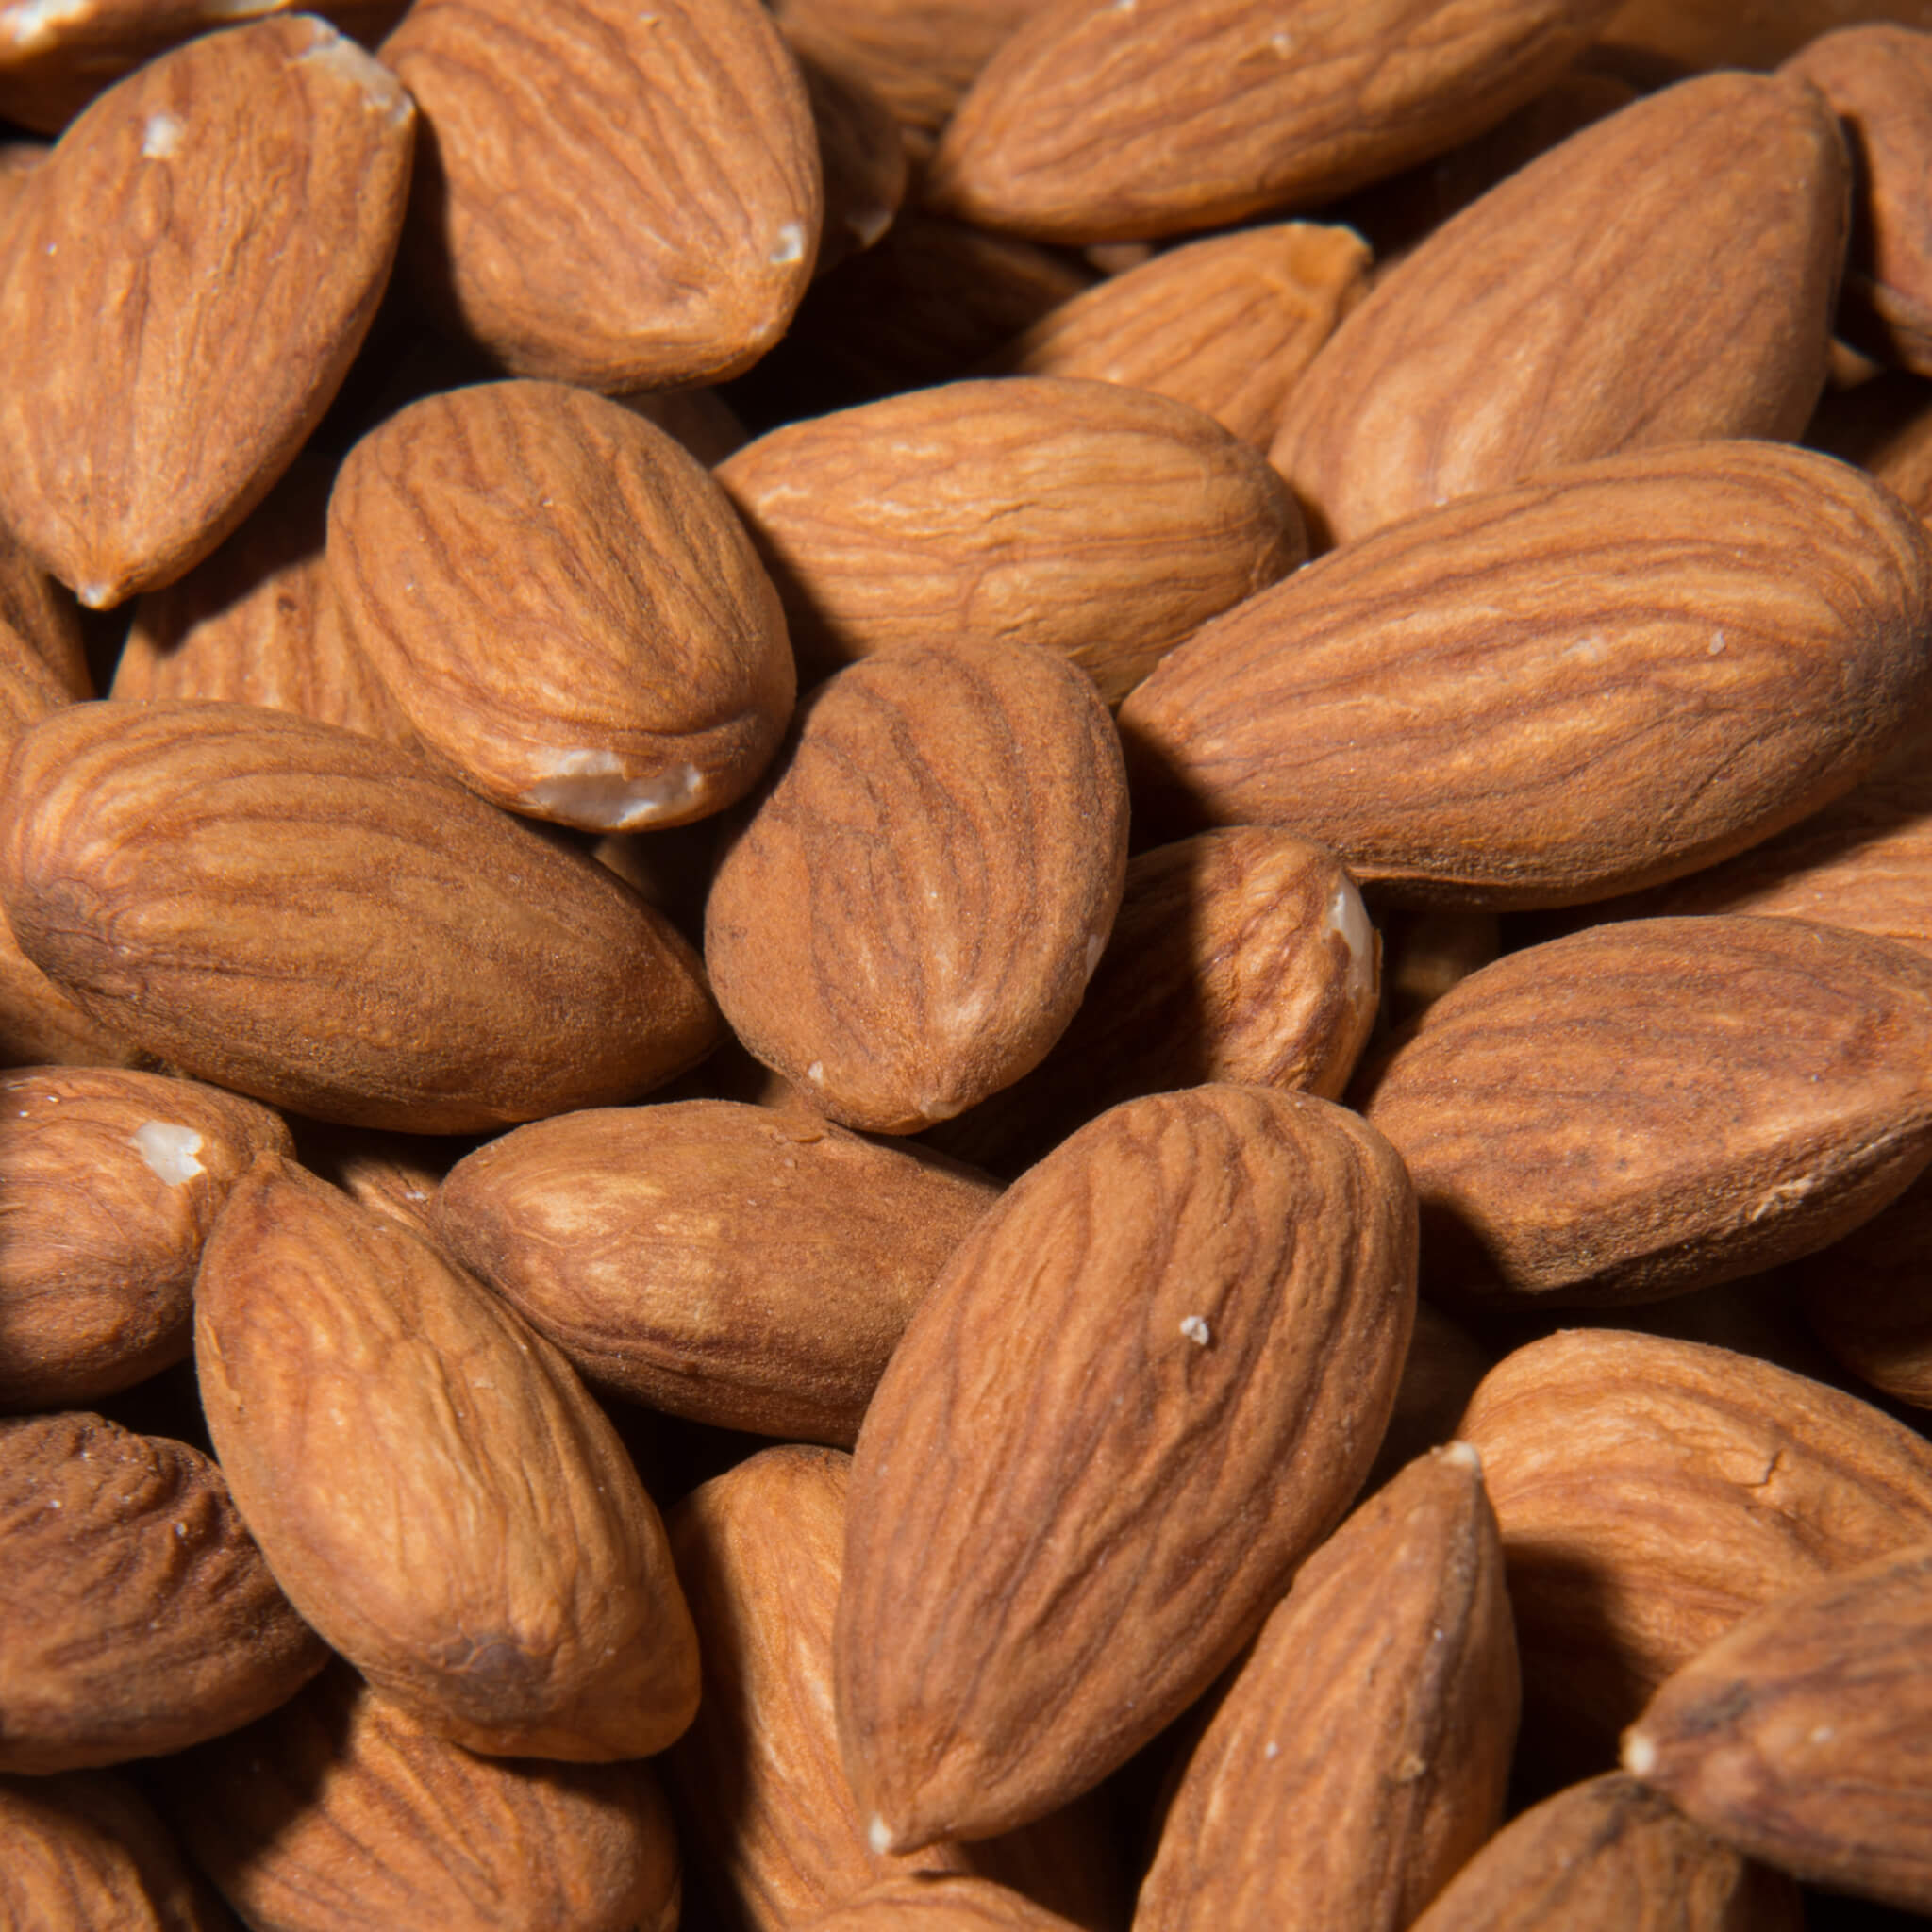 Product Page Key Ingredients: Almond